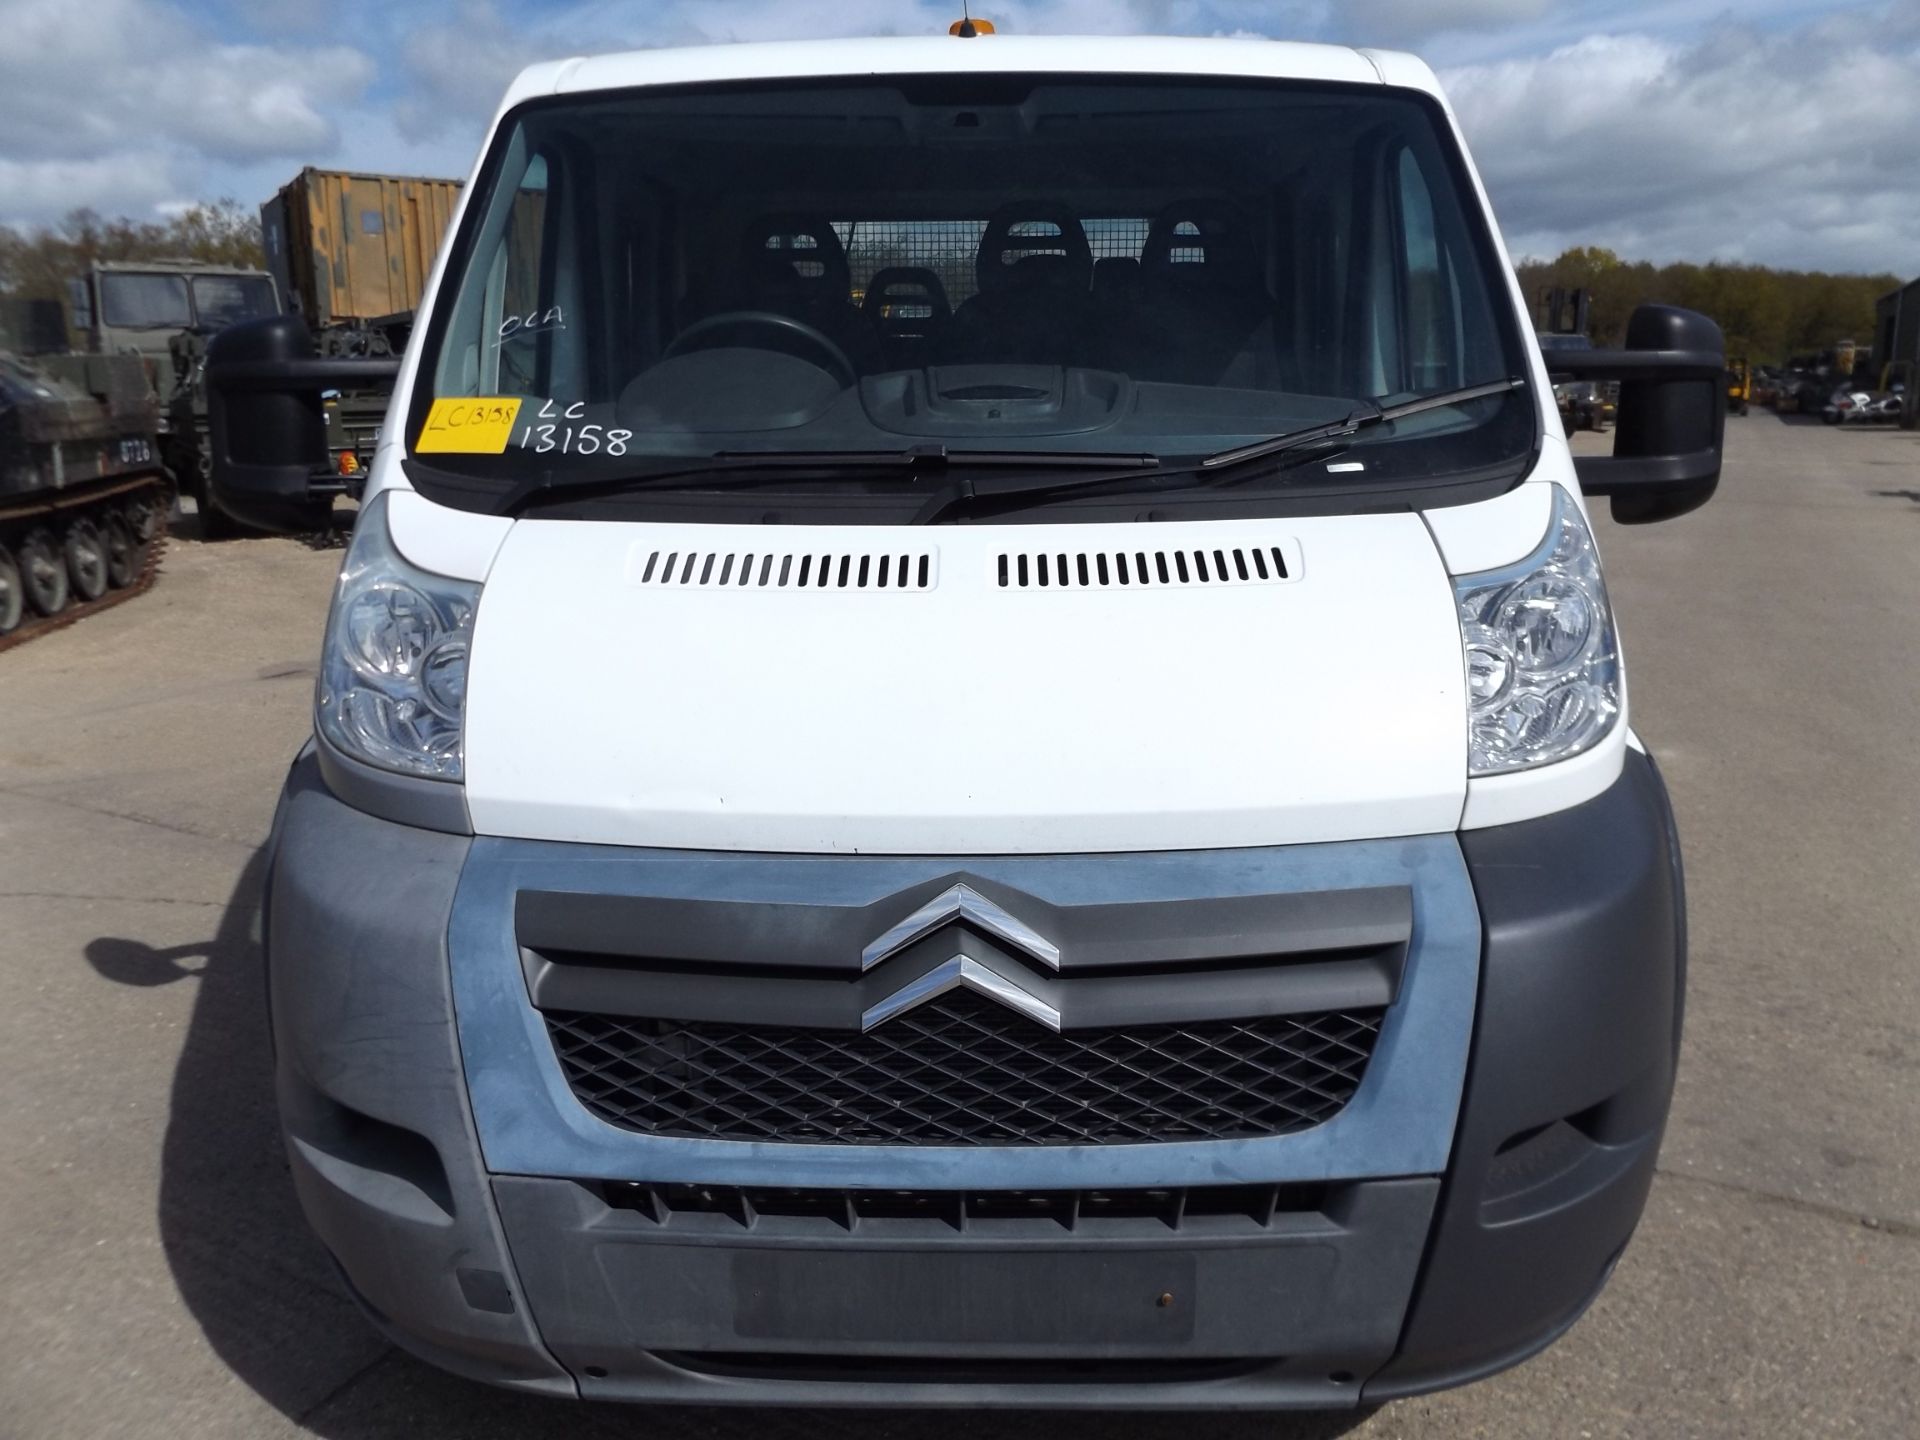 Citroen Relay 7 Seater Double Cab Dropside Pickup - Image 2 of 18